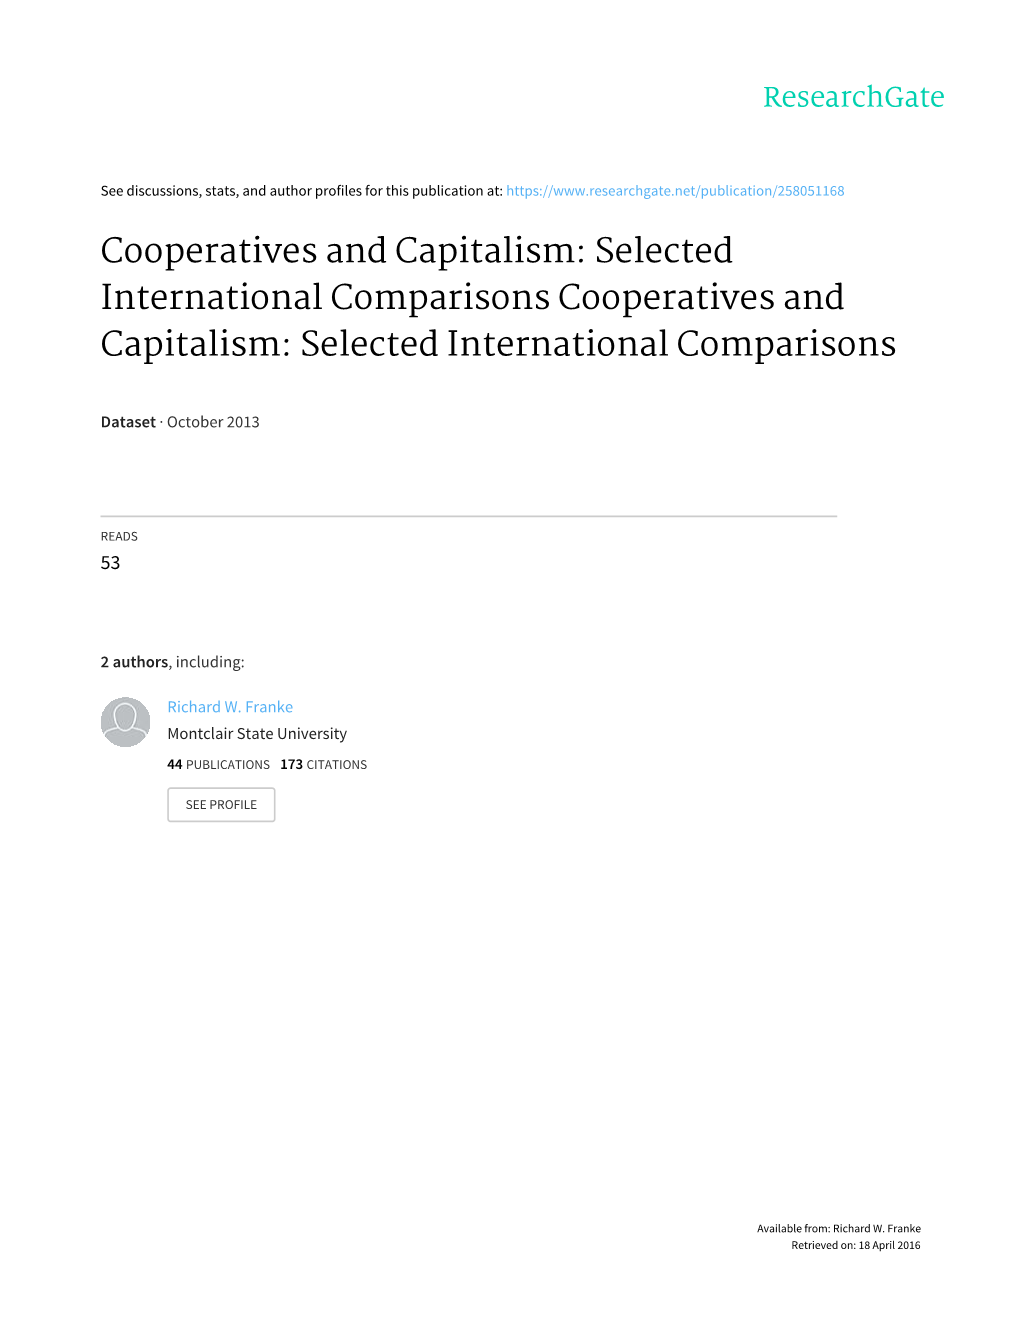 Cooperatives and Capitalism: Selected International Comparisons Cooperatives and Capitalism: Selected International Comparisons